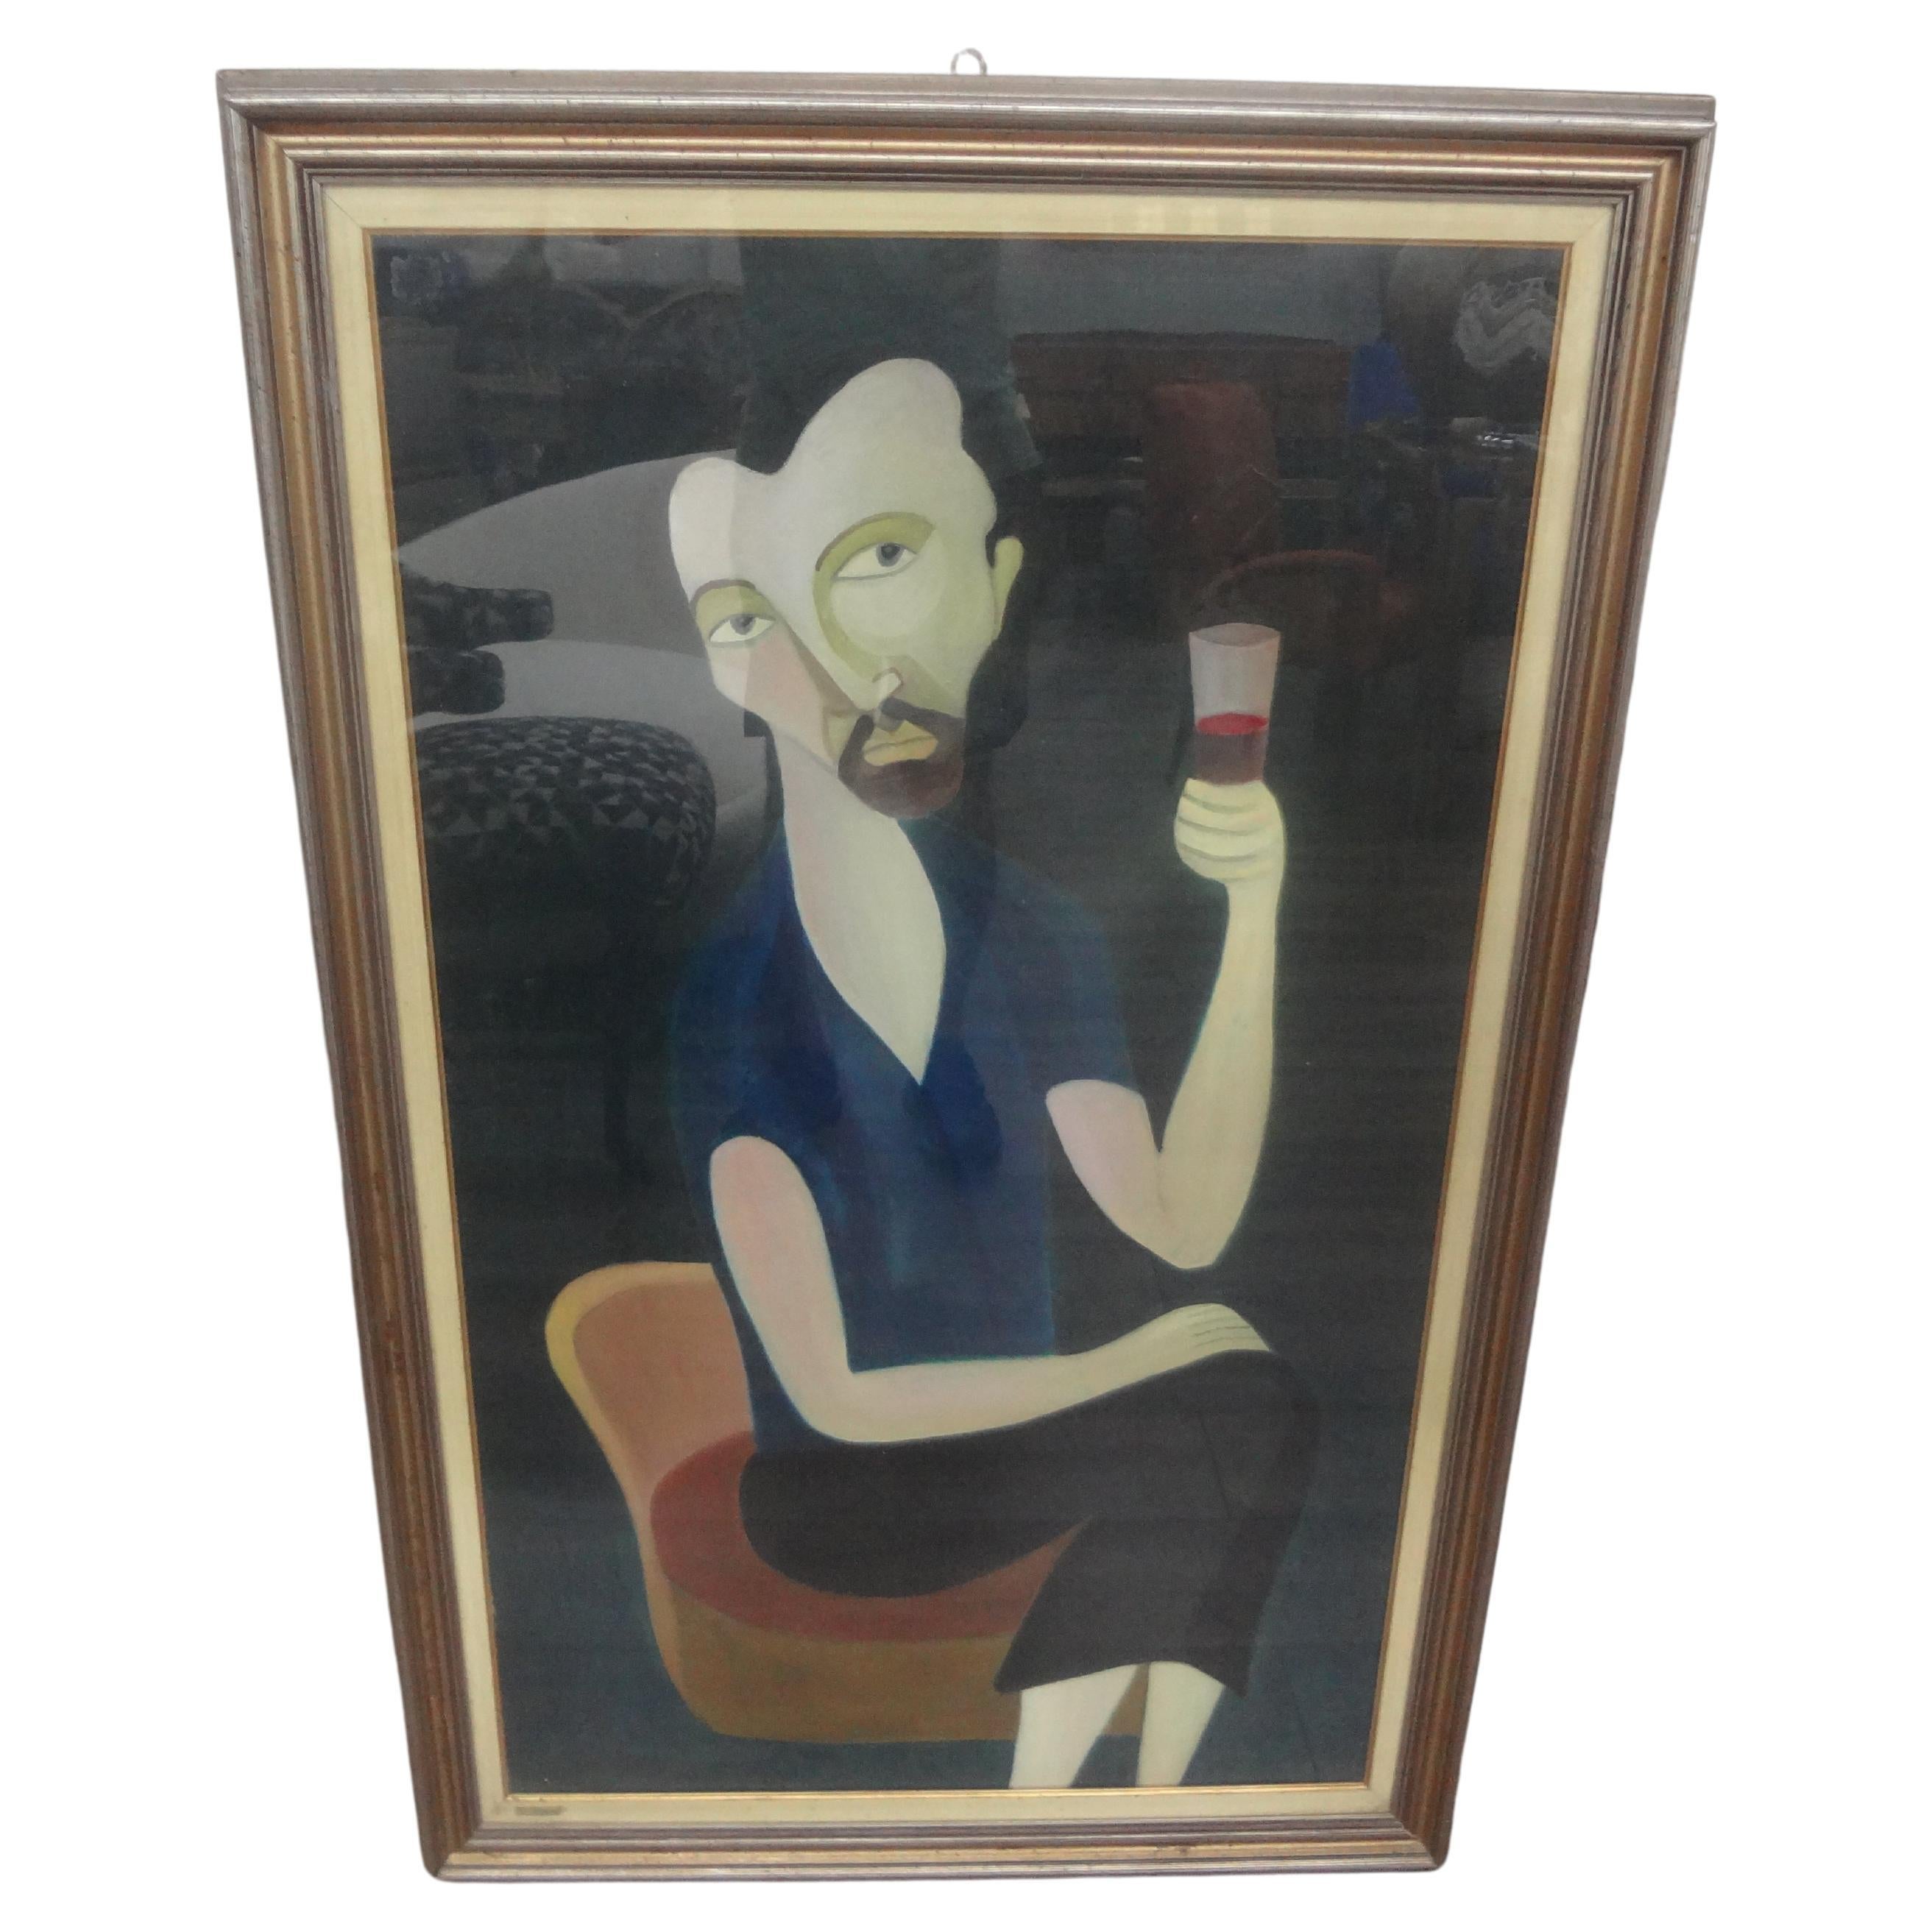 Italian Surrealist oil painting on canvas after Modigliani.
This interesting framed oil painting on canvas with a glass front is of an elongated male figure seated with a glass of wine.
This painting is in the Surrealist / Expressionist style